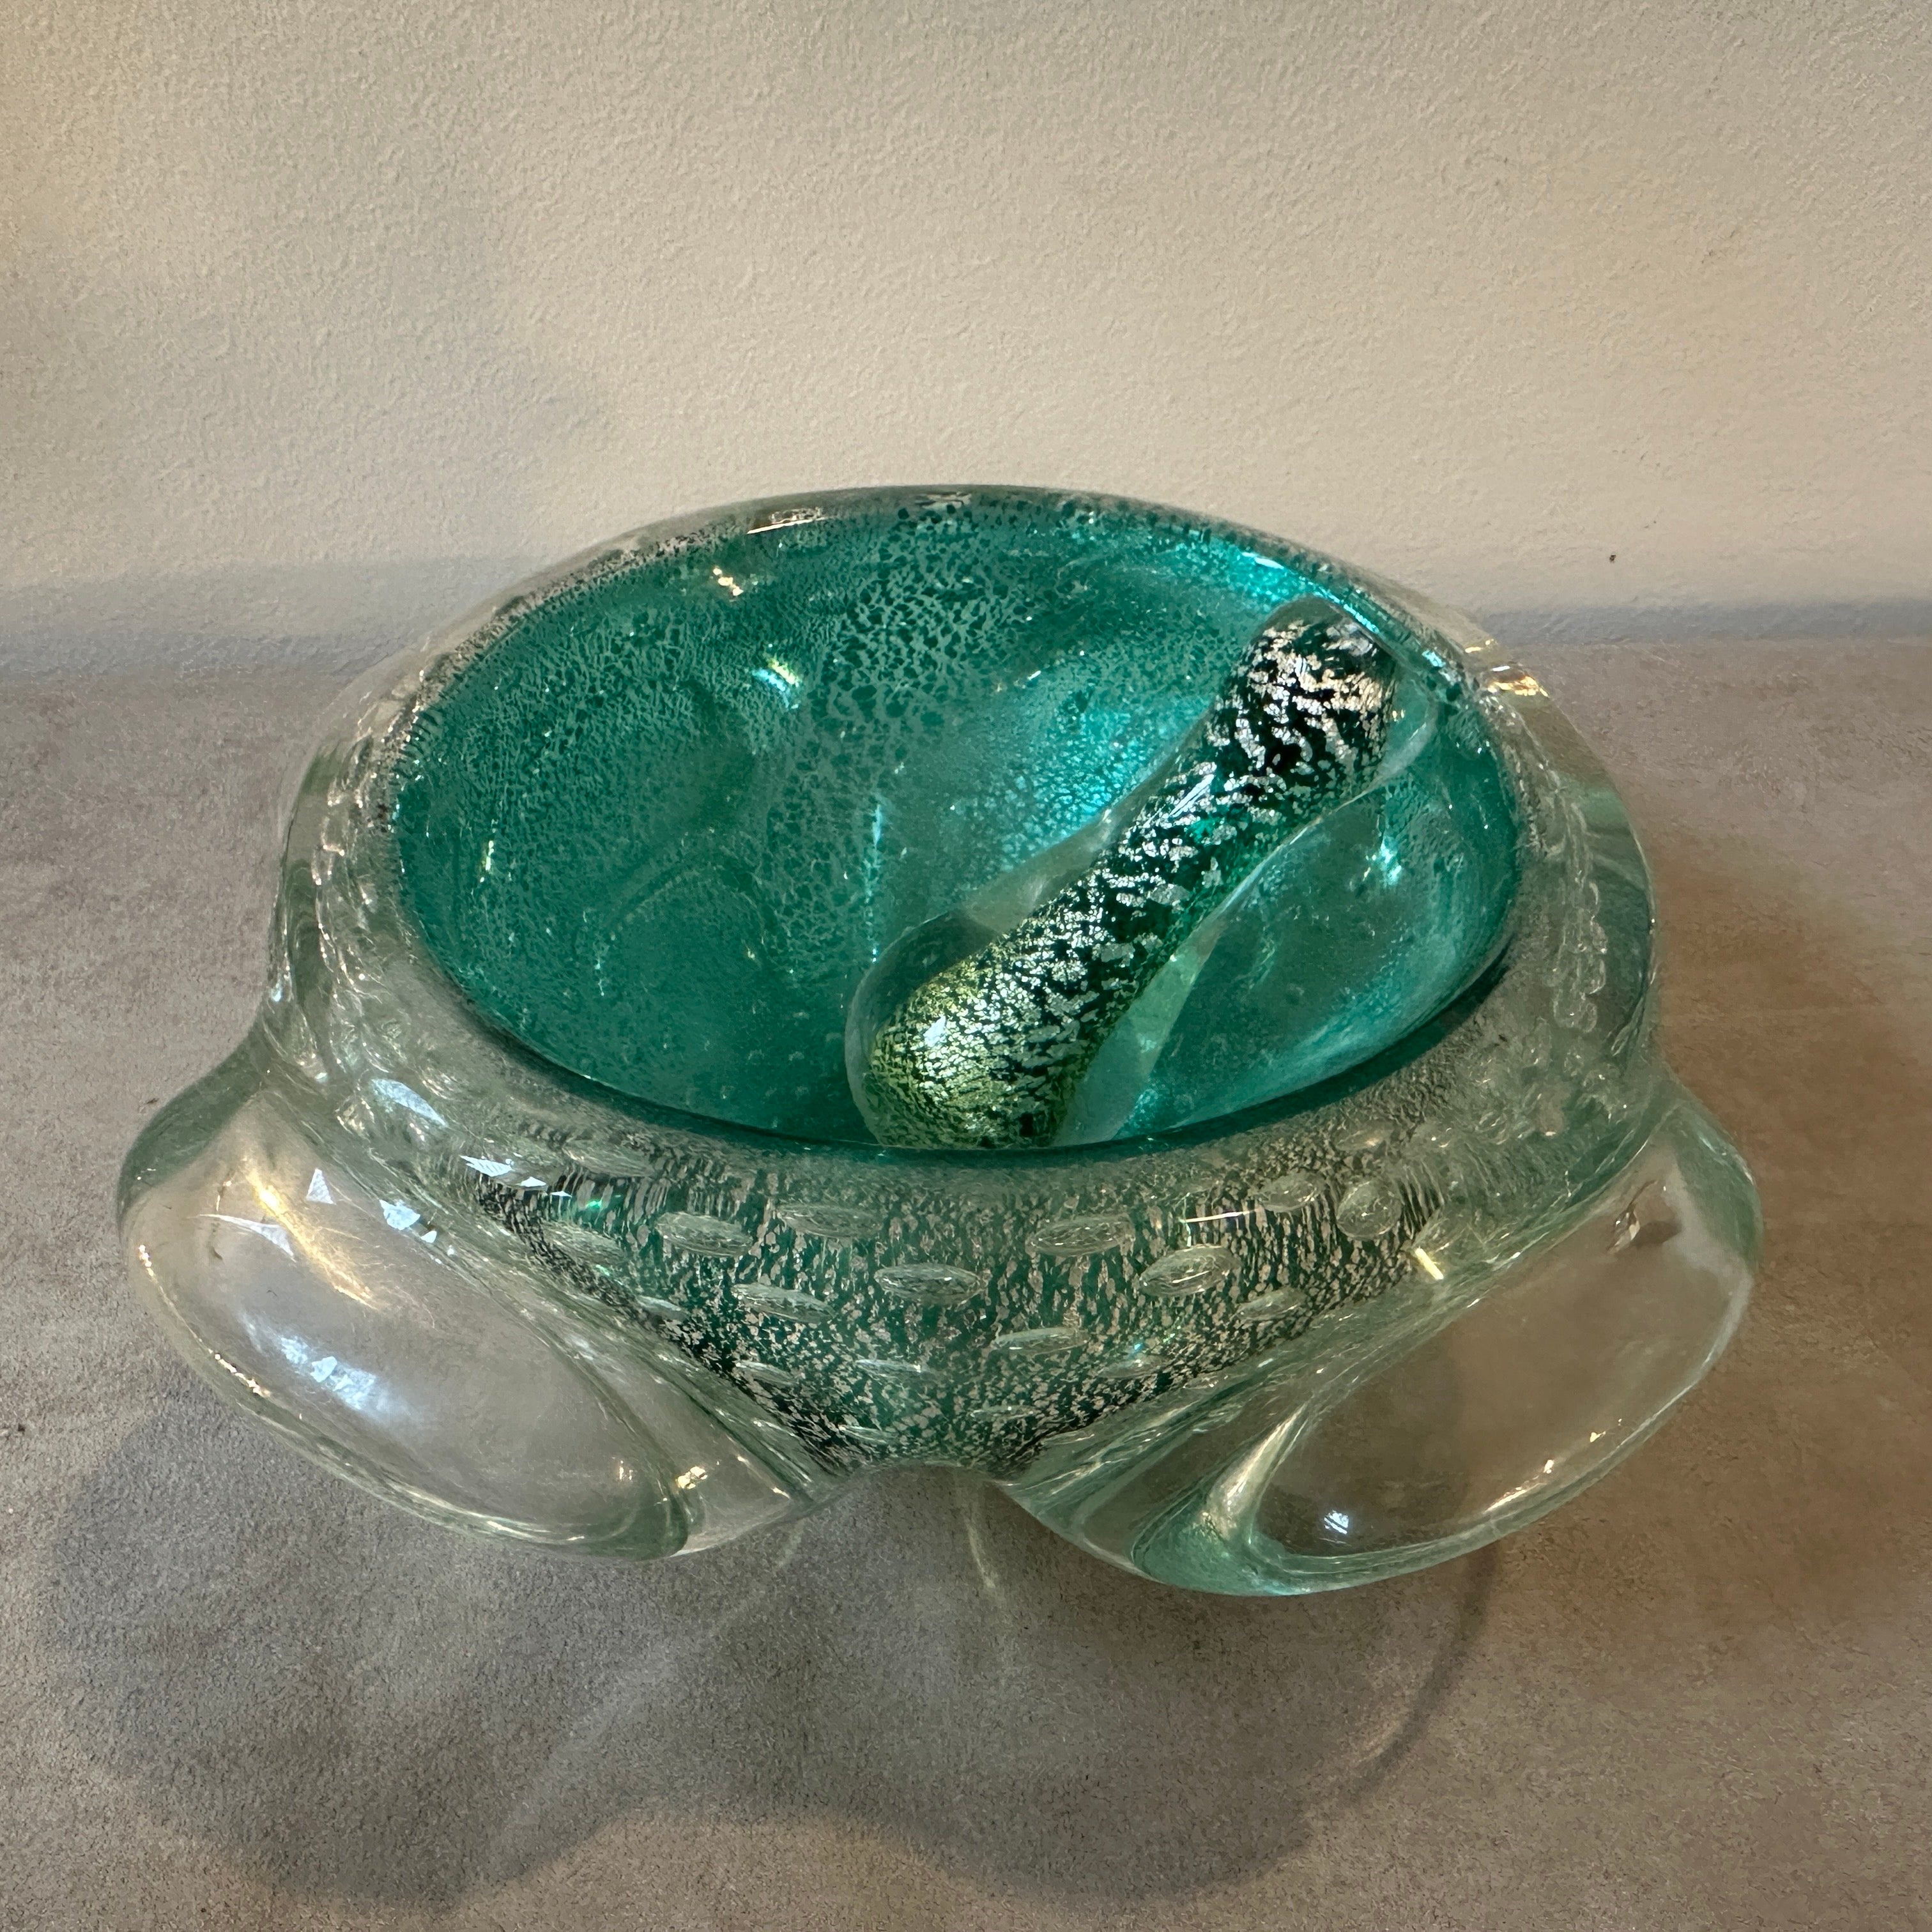 An heavy murano glass ashtray with original pestle designed and manufactured in Murano in the Sixties. green and gold bullicante murano glass it's in perfect conditions. Murano glass is a high-quality glass renowned for its clarity, color, and